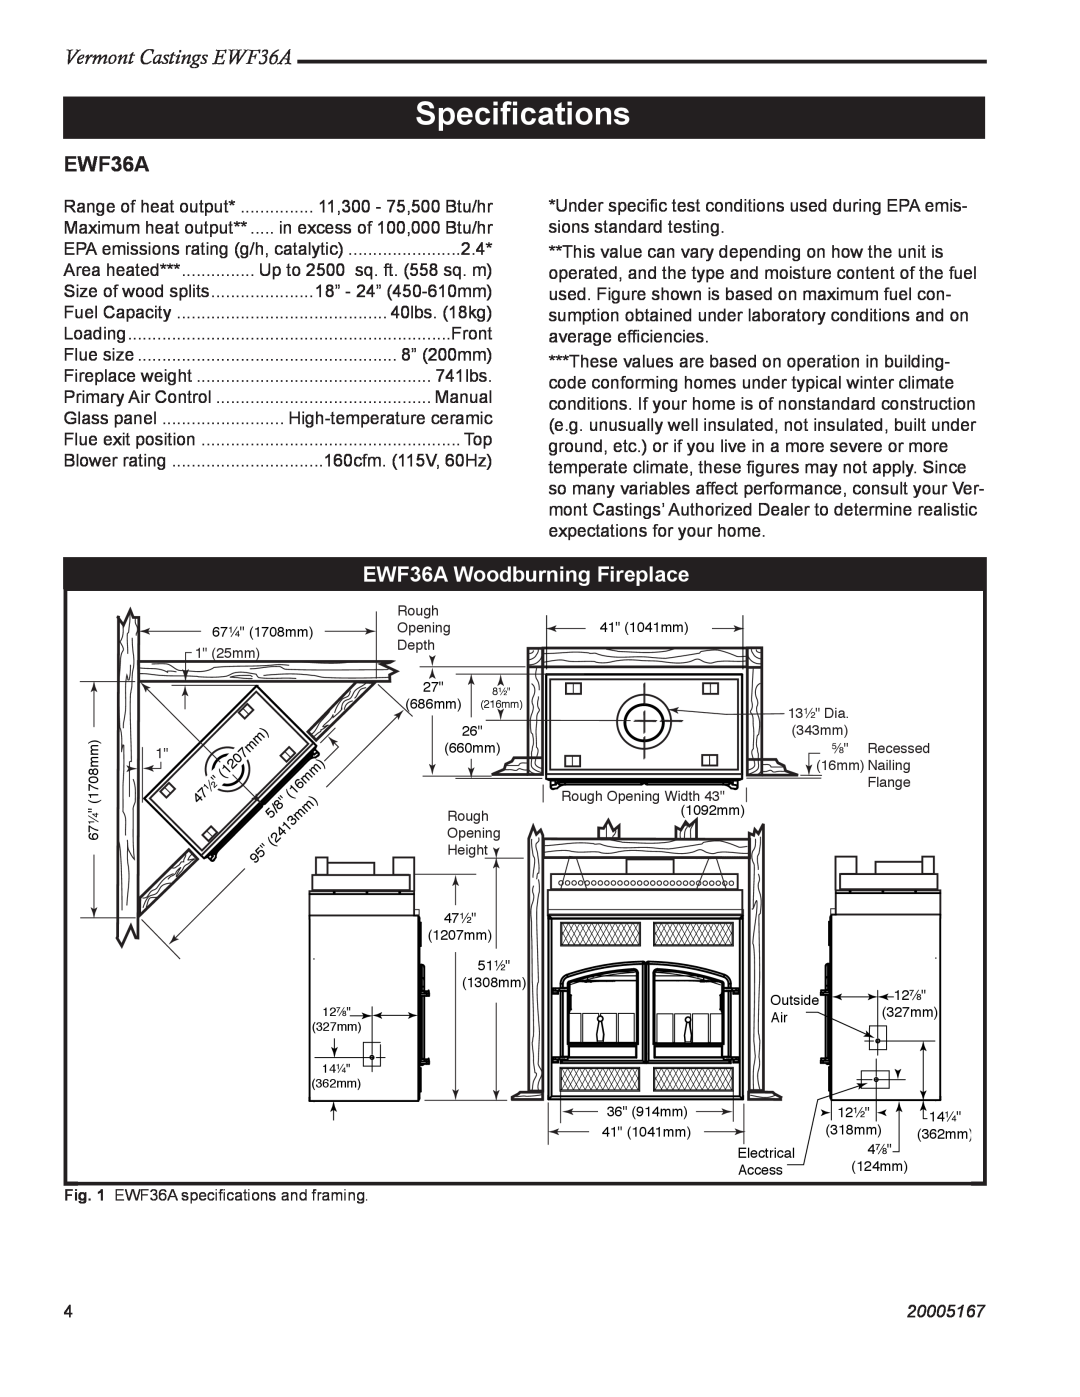 Vermont Casting installation instructions Speciﬁcations, EWF36A Woodburning Fireplace, Vermont Castings EWF36A, 20005167 